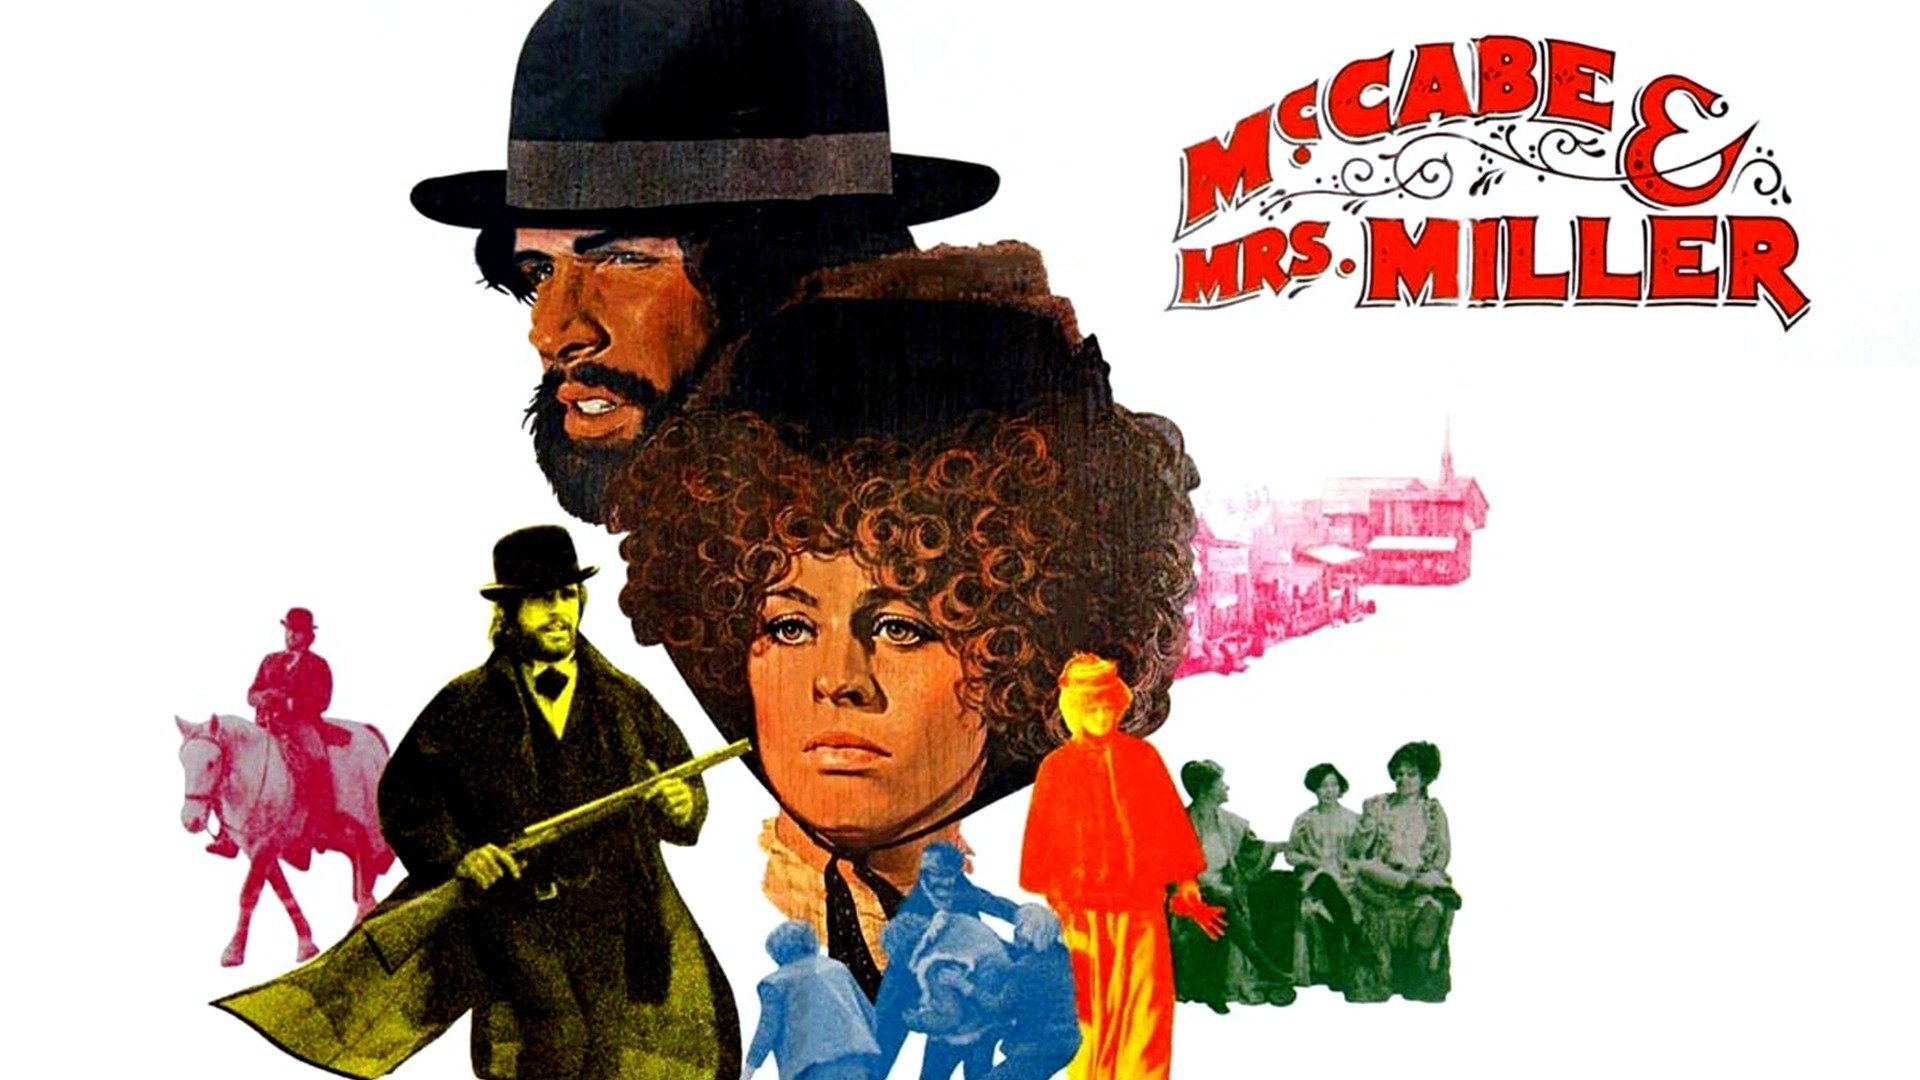 Mccabe And Mrs. Miller